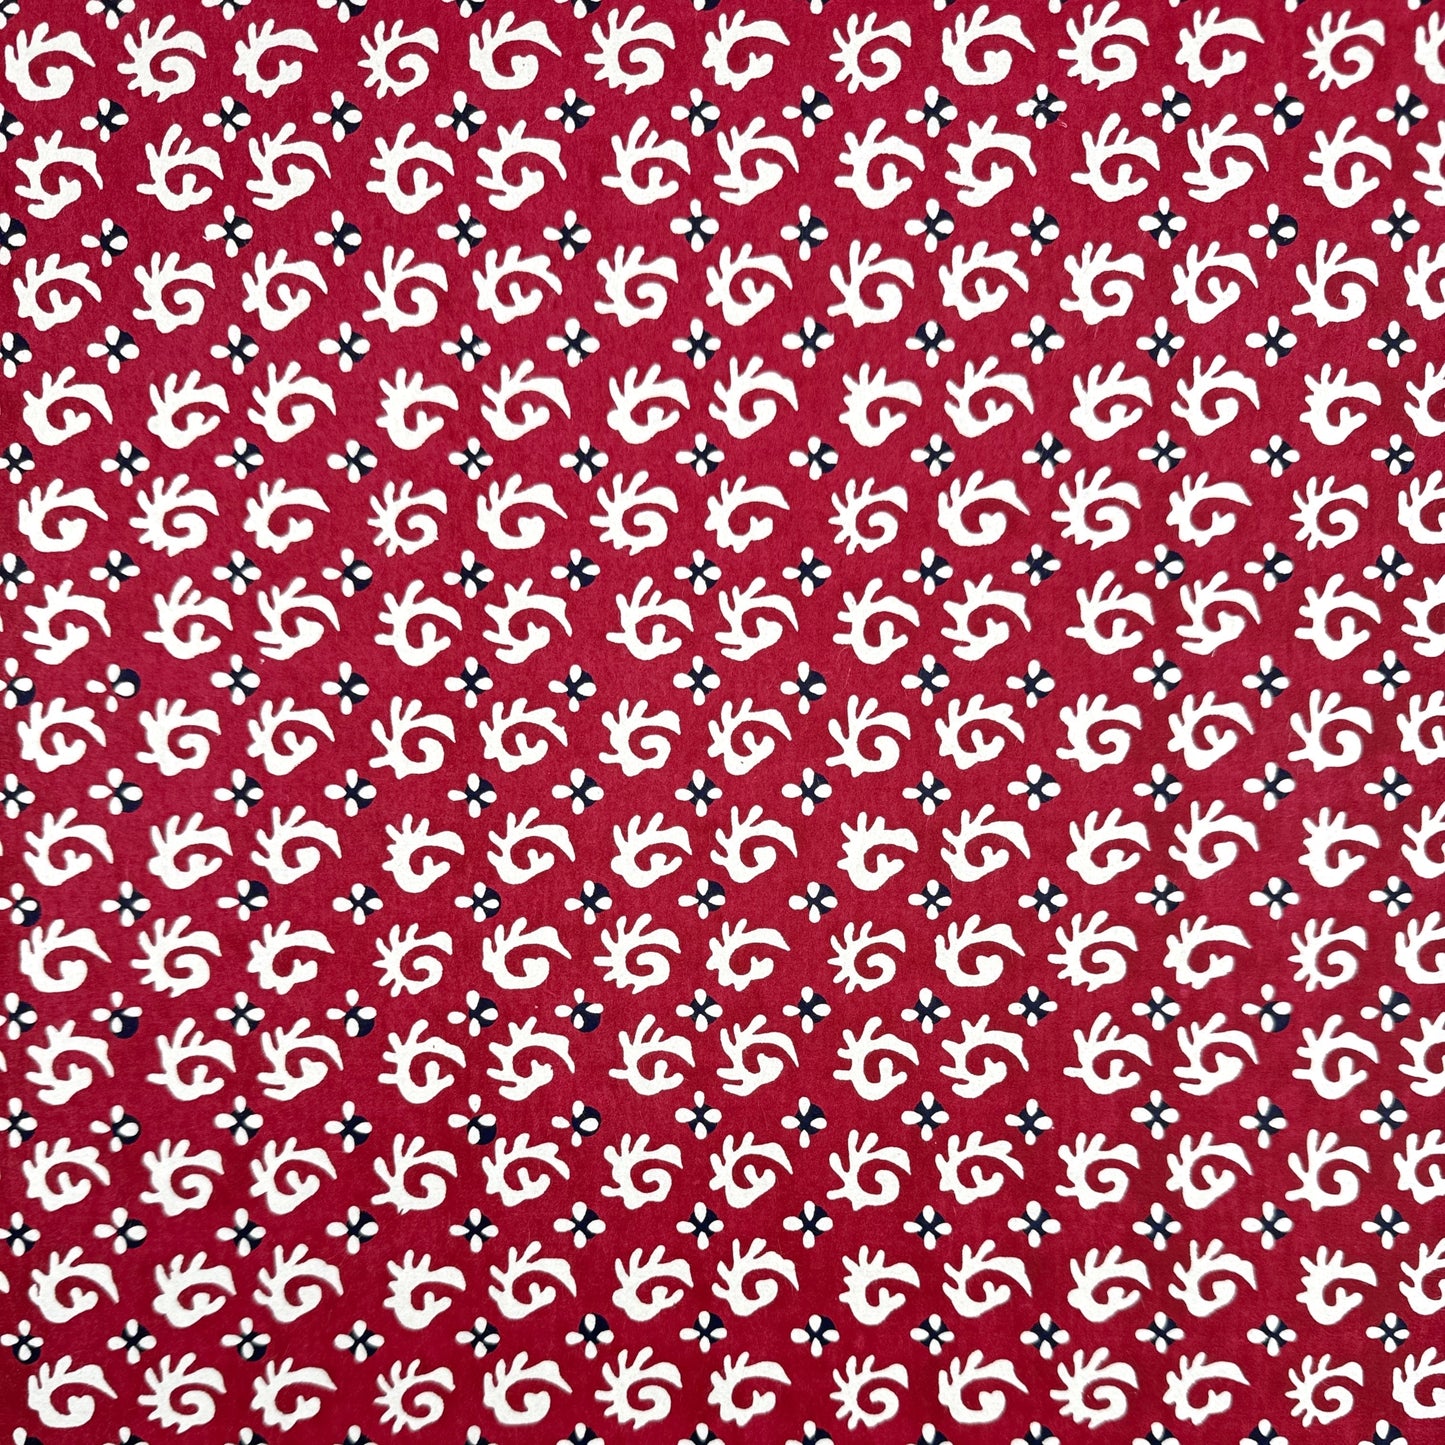 A Japanese stencil-dyed patterned paper with a repeat pattern in white on a deep rich red background.